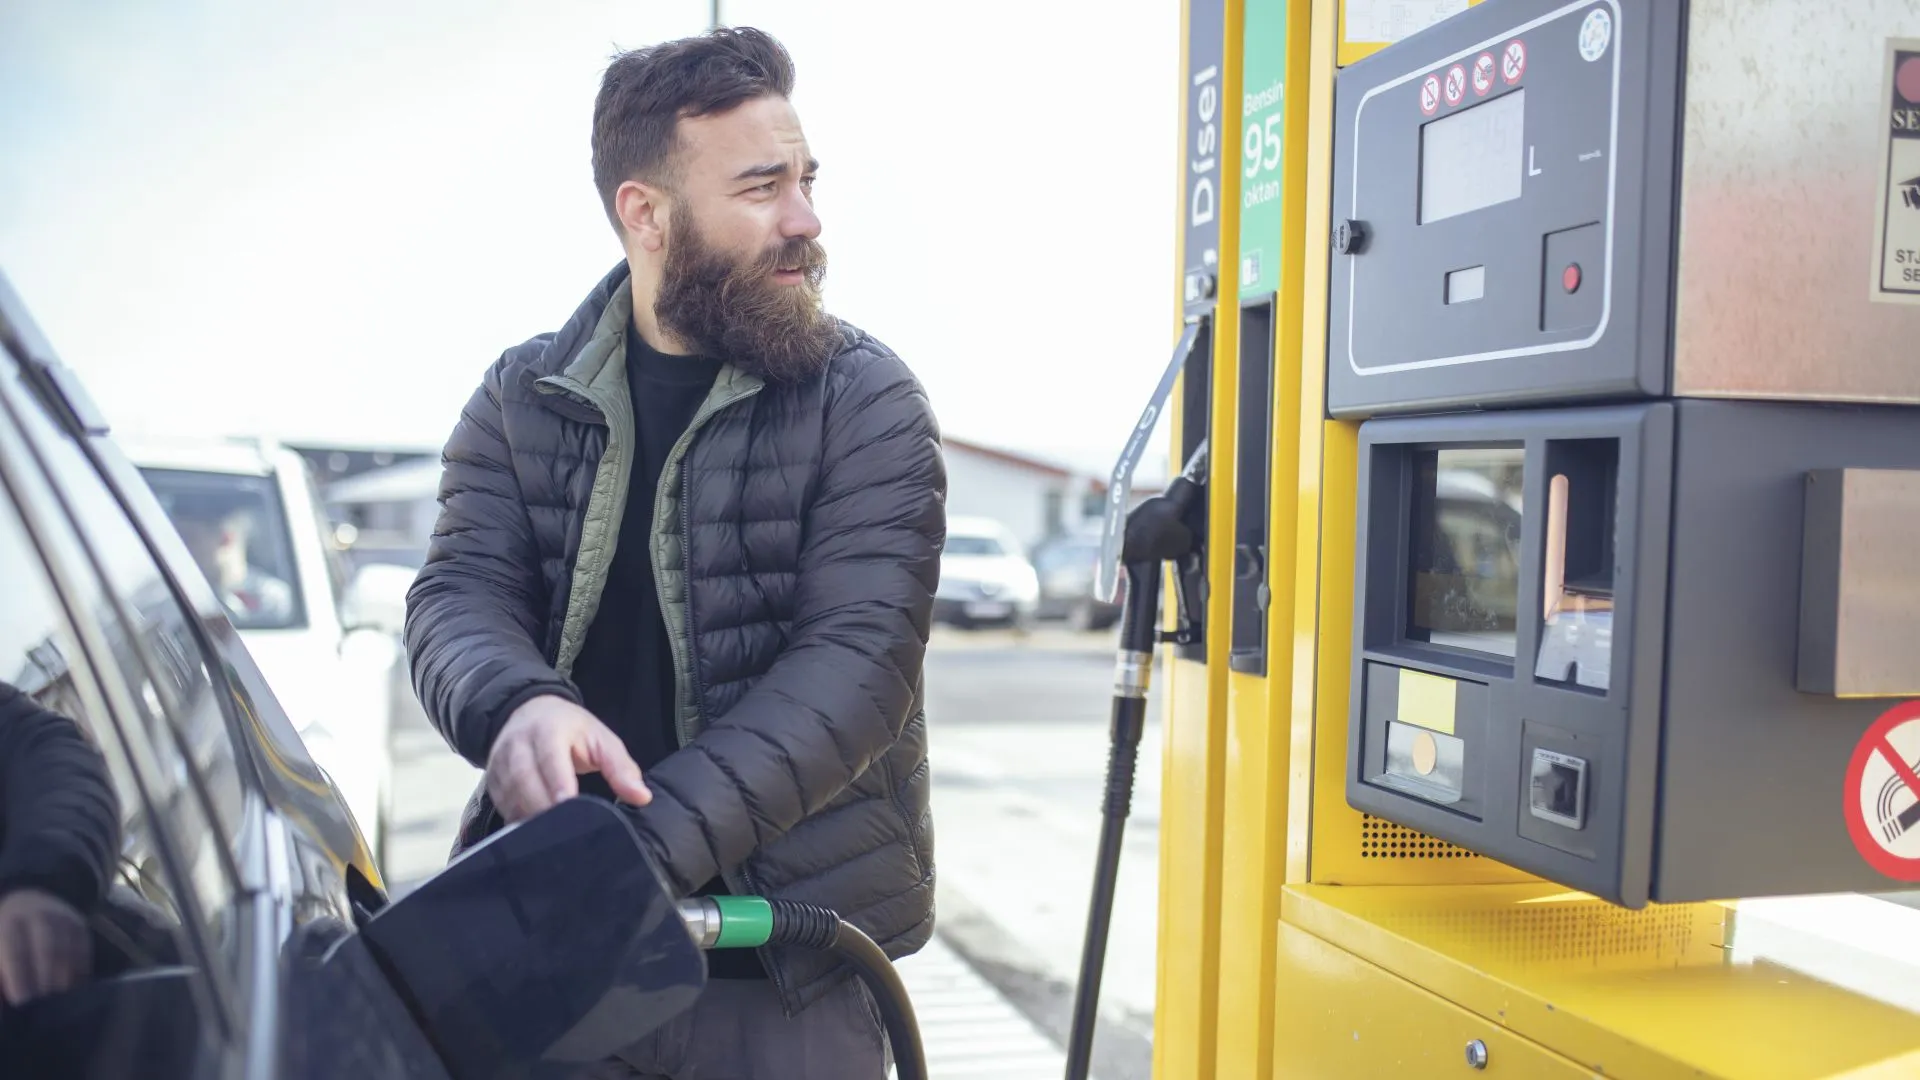 Before leaving and traveling by car, the man fills his tank with fuel.